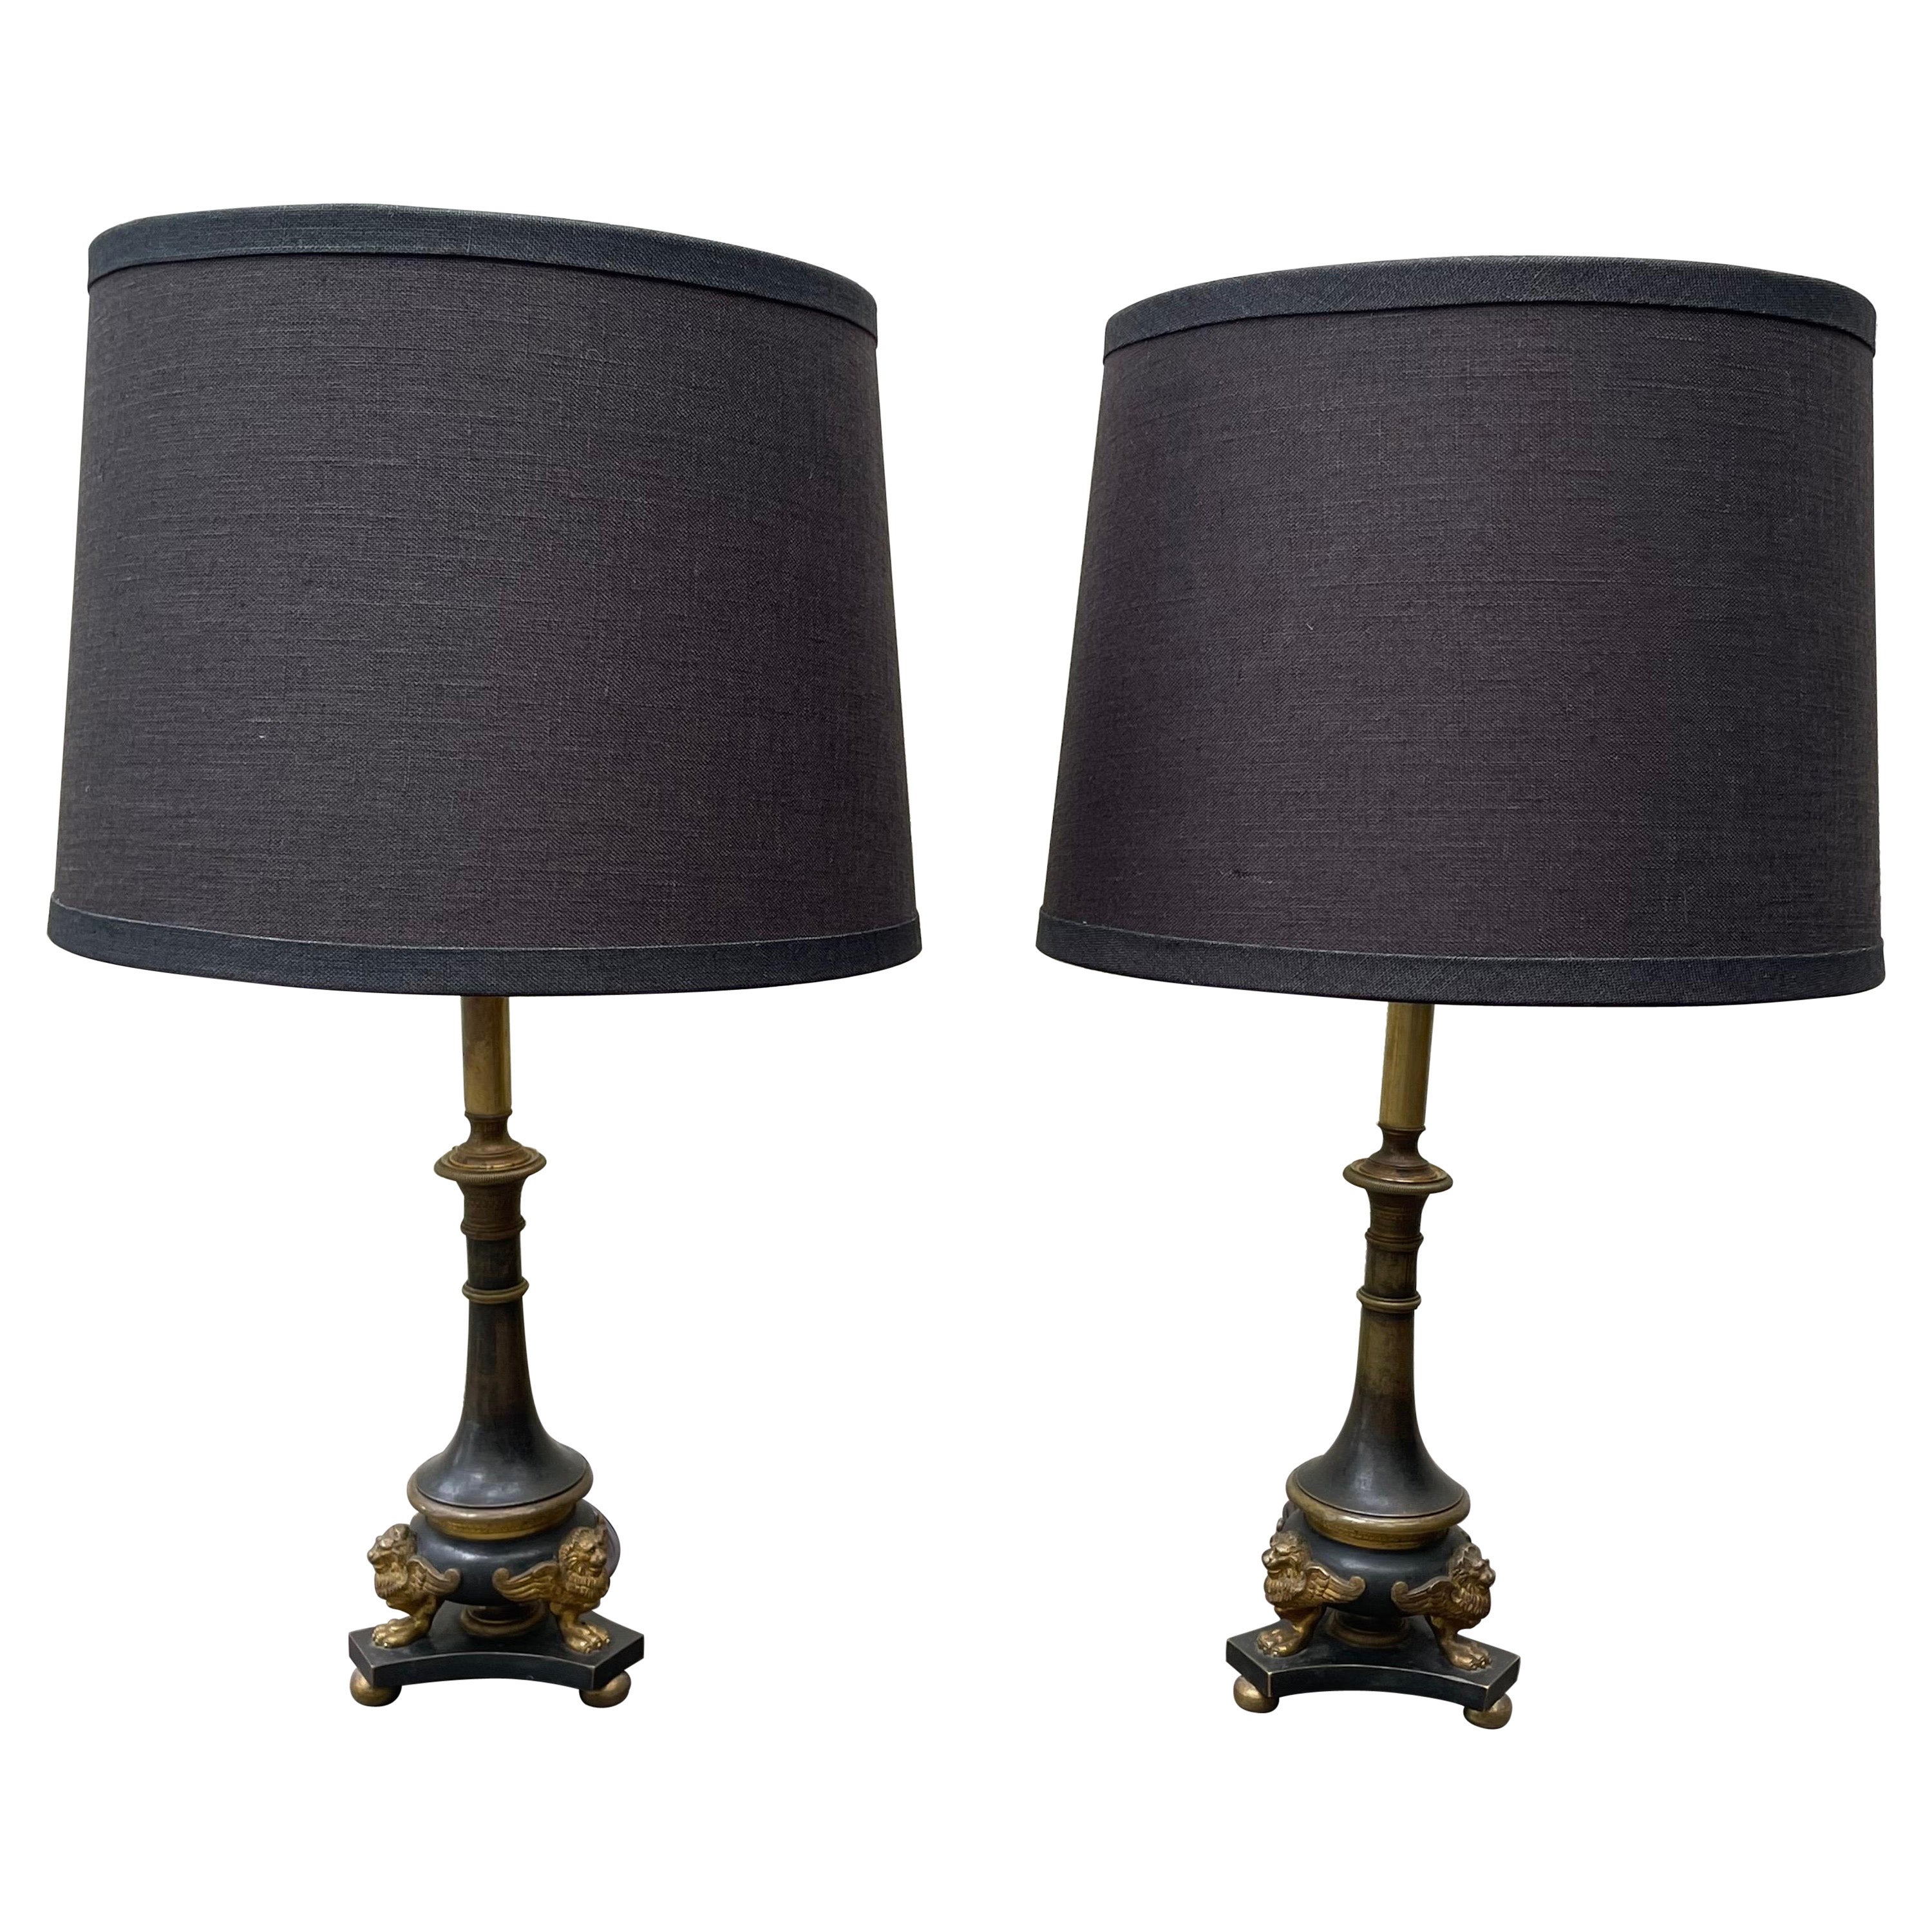 Pair of Small Scale Bronze Table Lamps, Late 19th Century, French For Sale